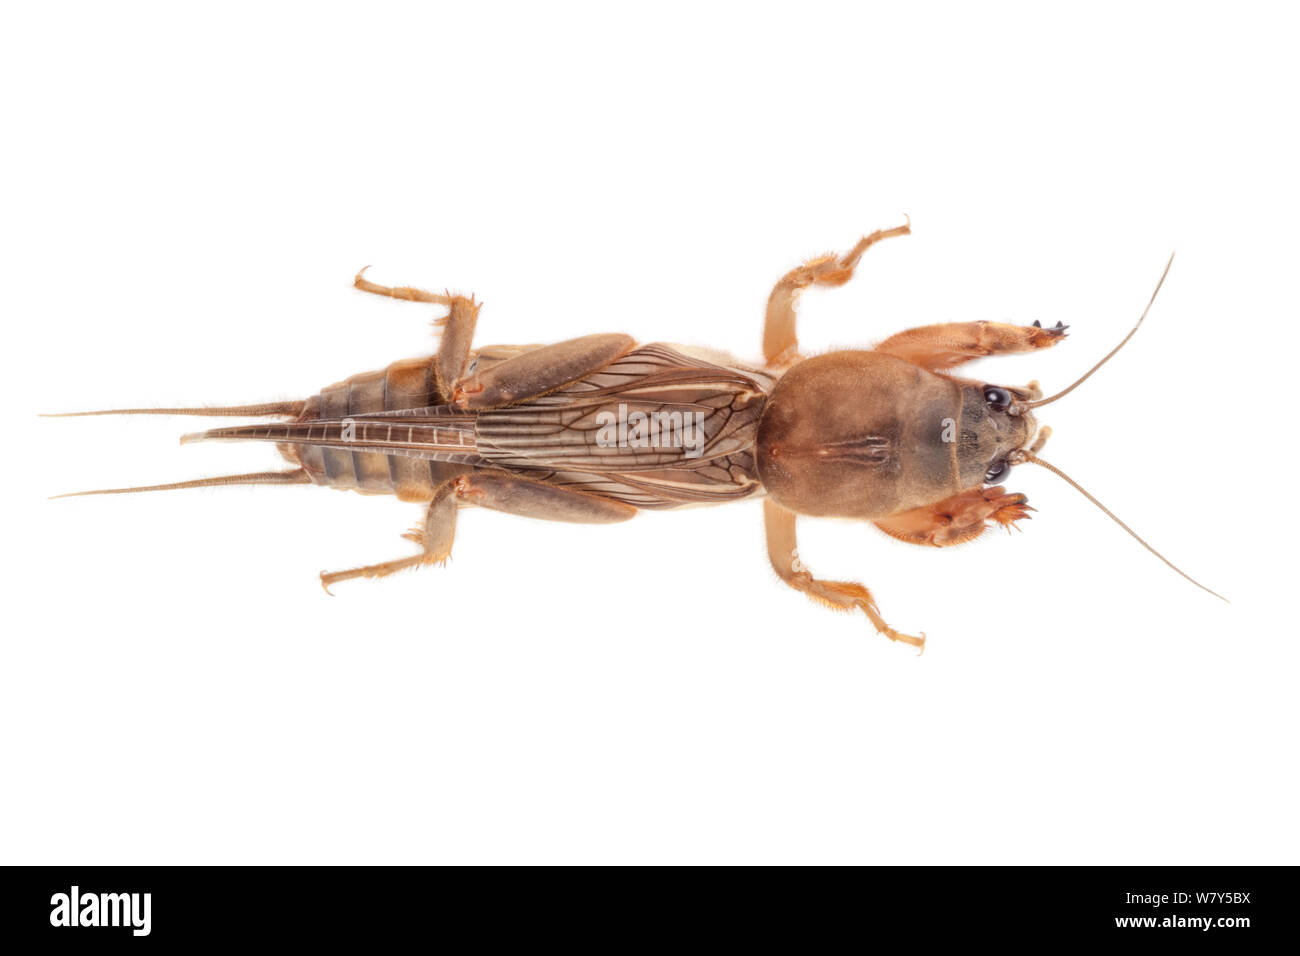 Mole cricket (Gryllotalpidae) showing shovel-like forelimbs that are well adapted to burrowing. Danum Valley, Sabah, Borneo. Stock Photo